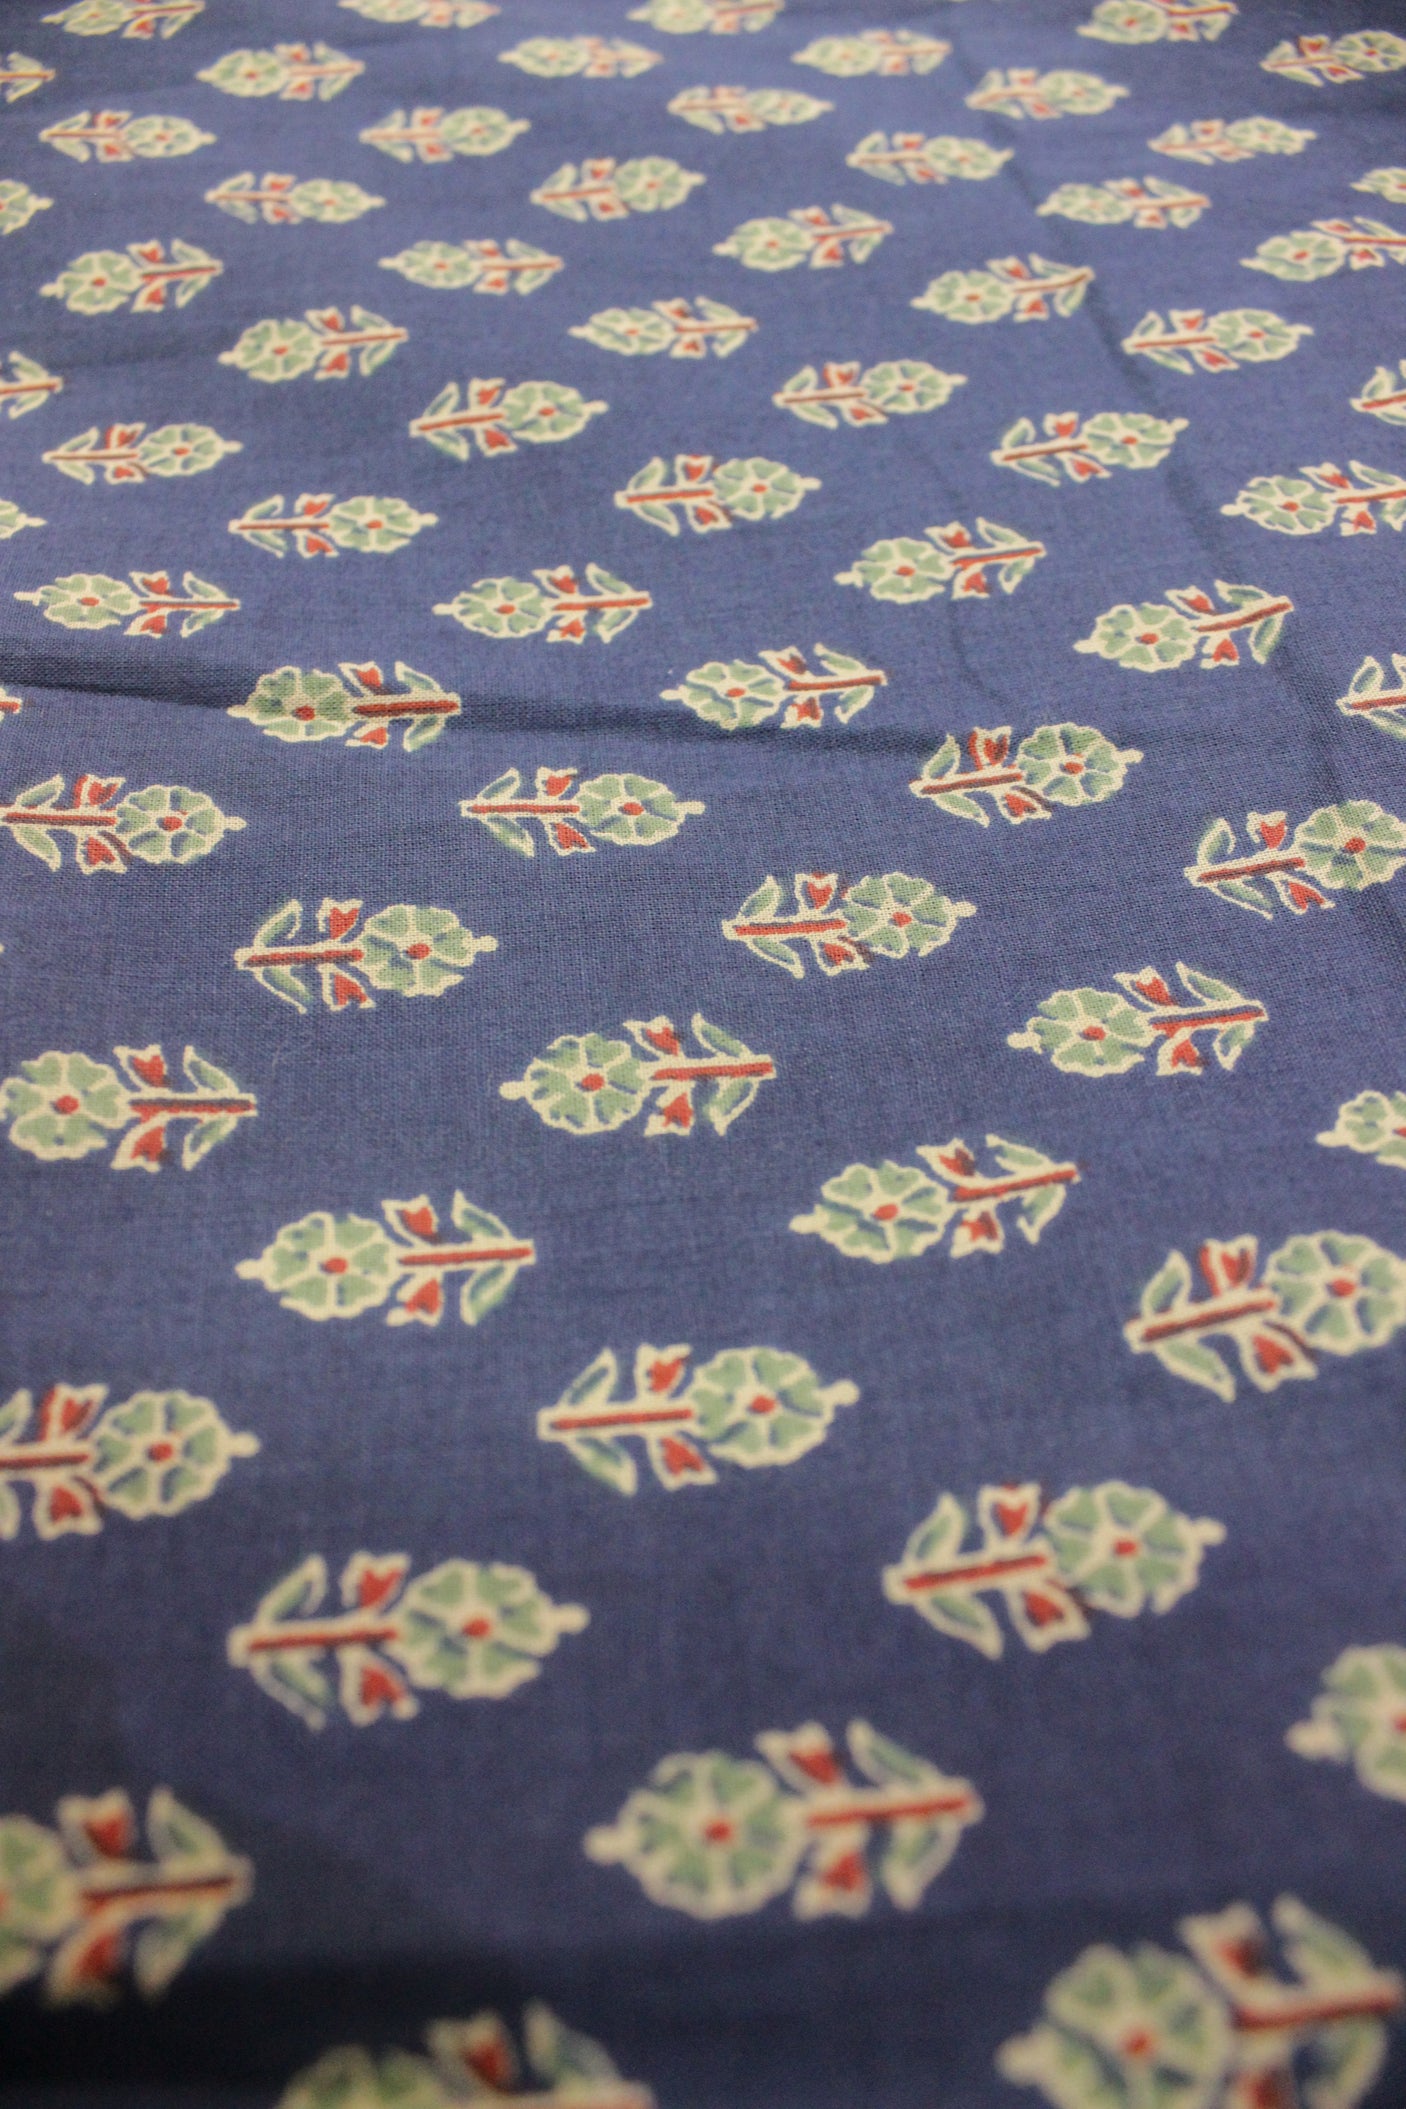 Dark Teal Blue with All Over Flowers Printed Premium Cotton Unstitched Fabric